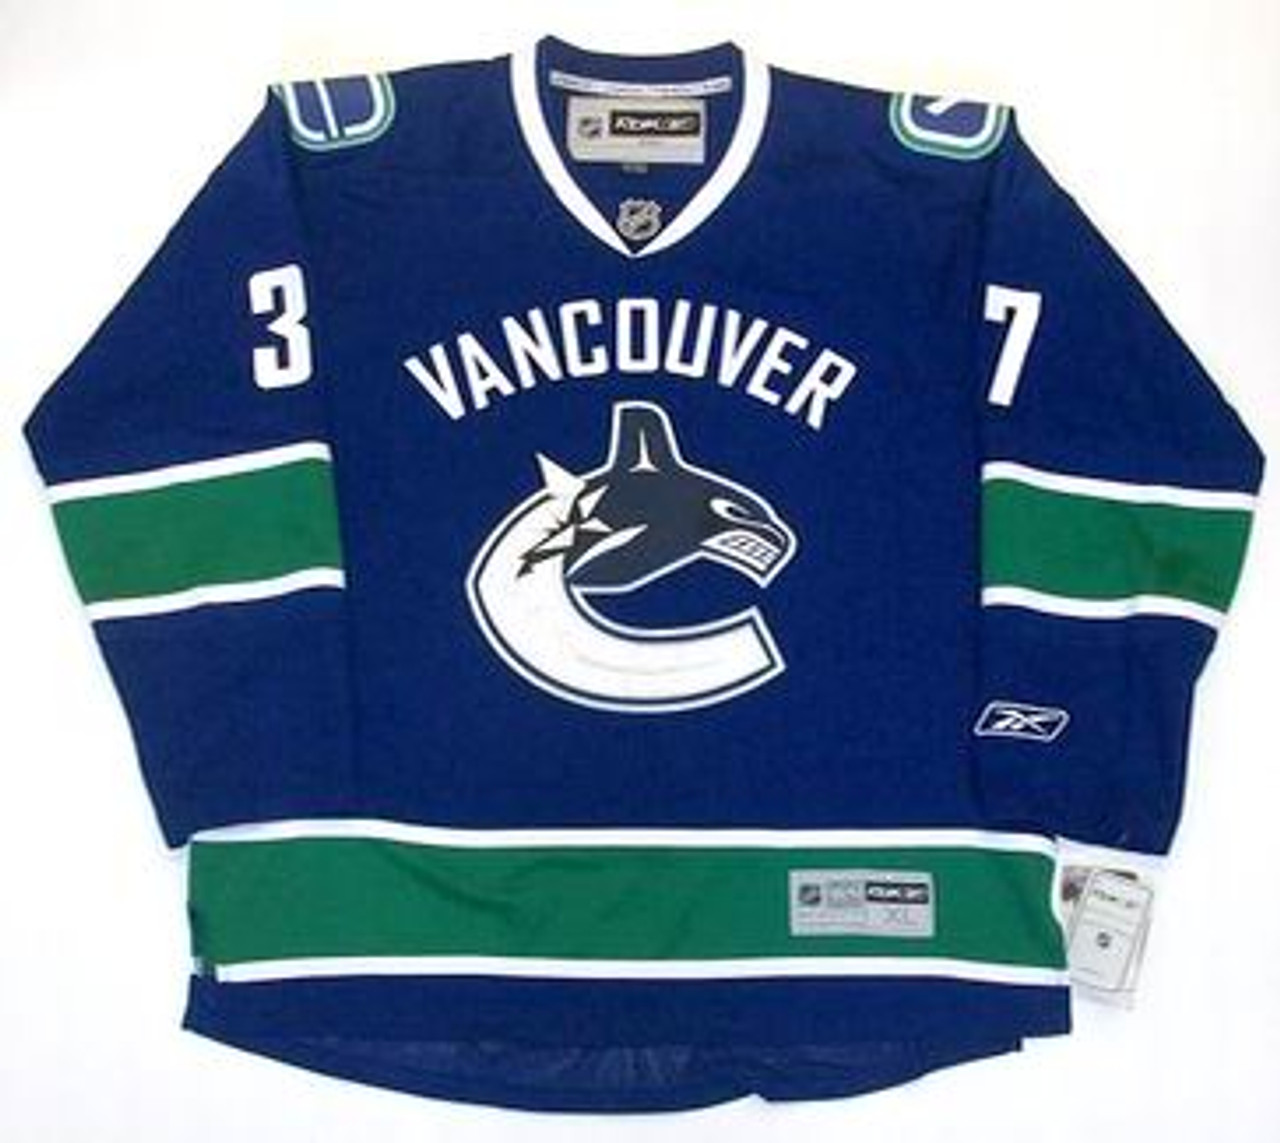 Rick Rypien kit on gradient retro jersey with the super hard to